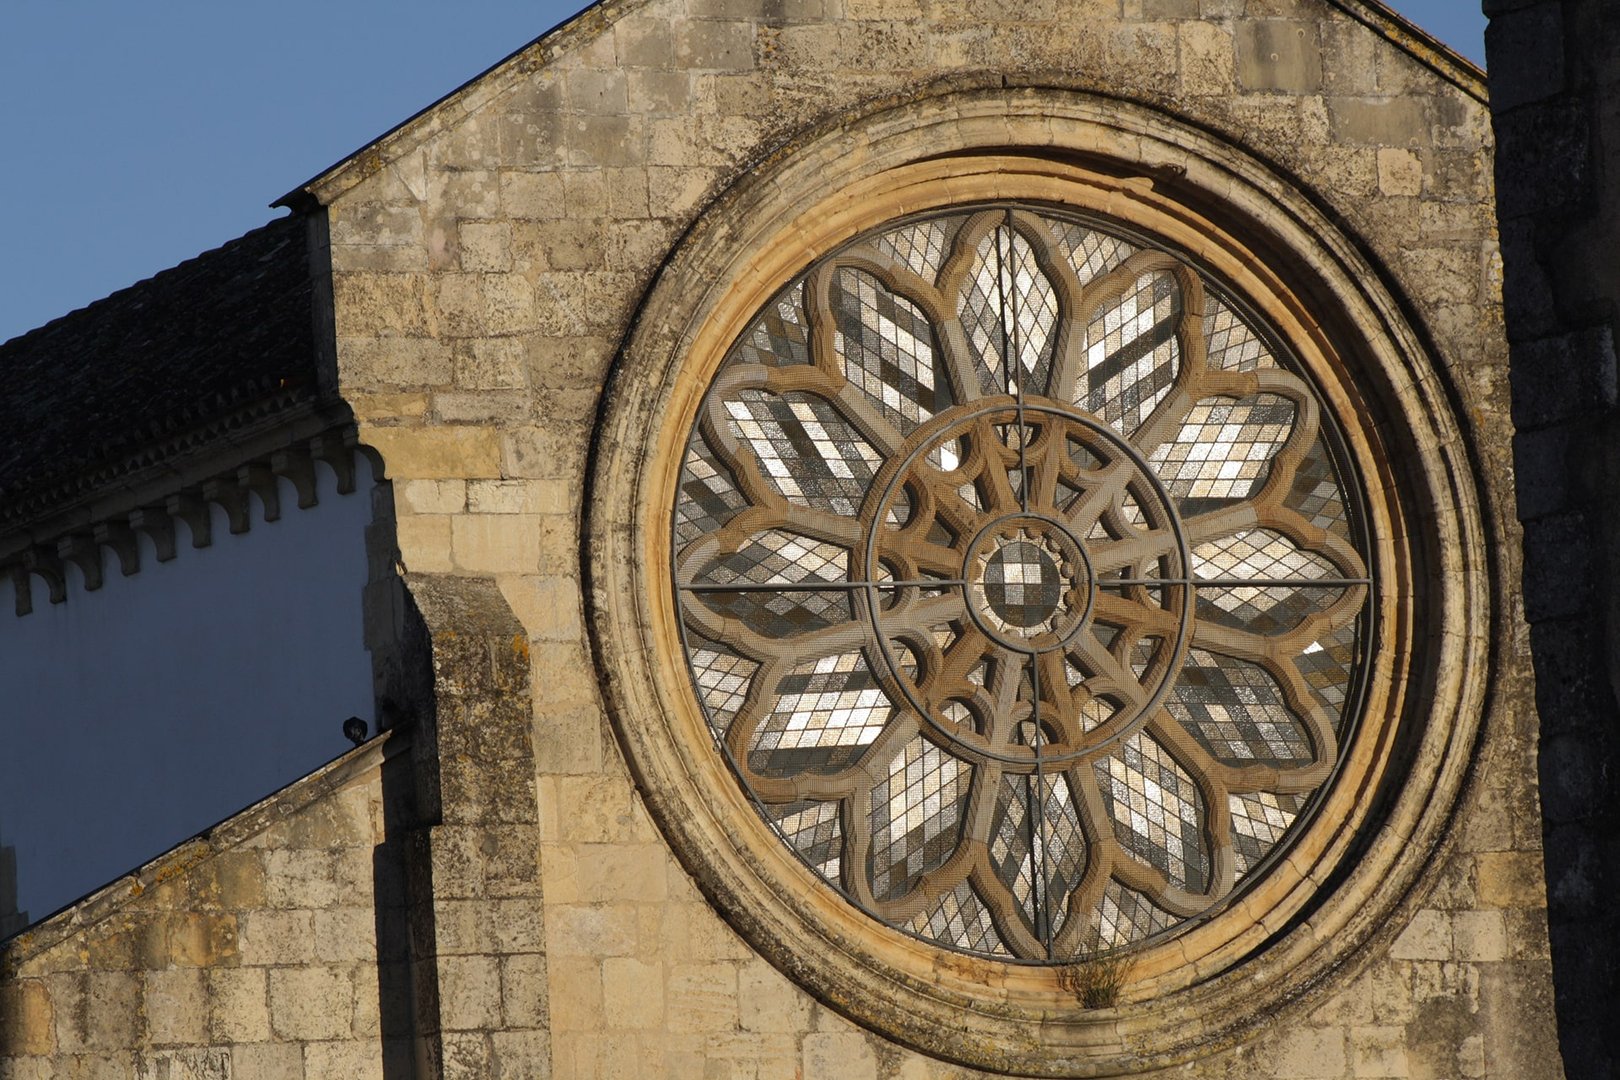 Rose window — The magnificent glass rose window that illuminates the inside of the Temple.